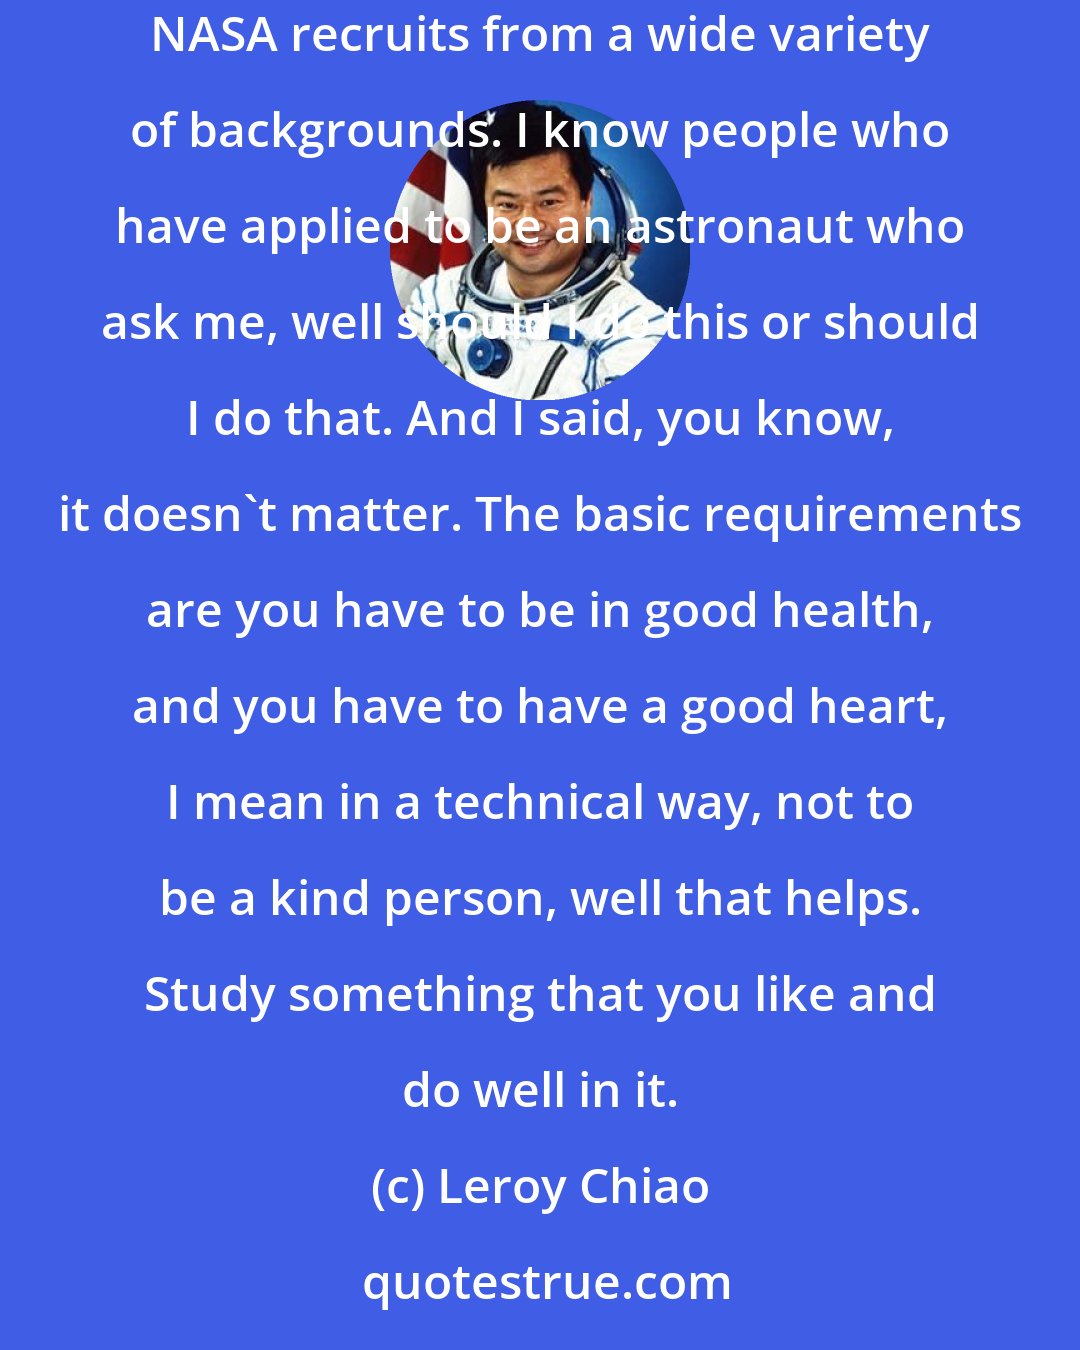 Leroy Chiao: My advice for an aspiring astronaut is to really follow your passion. I mean, study something that interests you, but also qualifies you to apply. NASA recruits from a wide variety of backgrounds. I know people who have applied to be an astronaut who ask me, well should I do this or should I do that. And I said, you know, it doesn't matter. The basic requirements are you have to be in good health, and you have to have a good heart, I mean in a technical way, not to be a kind person, well that helps. Study something that you like and do well in it.